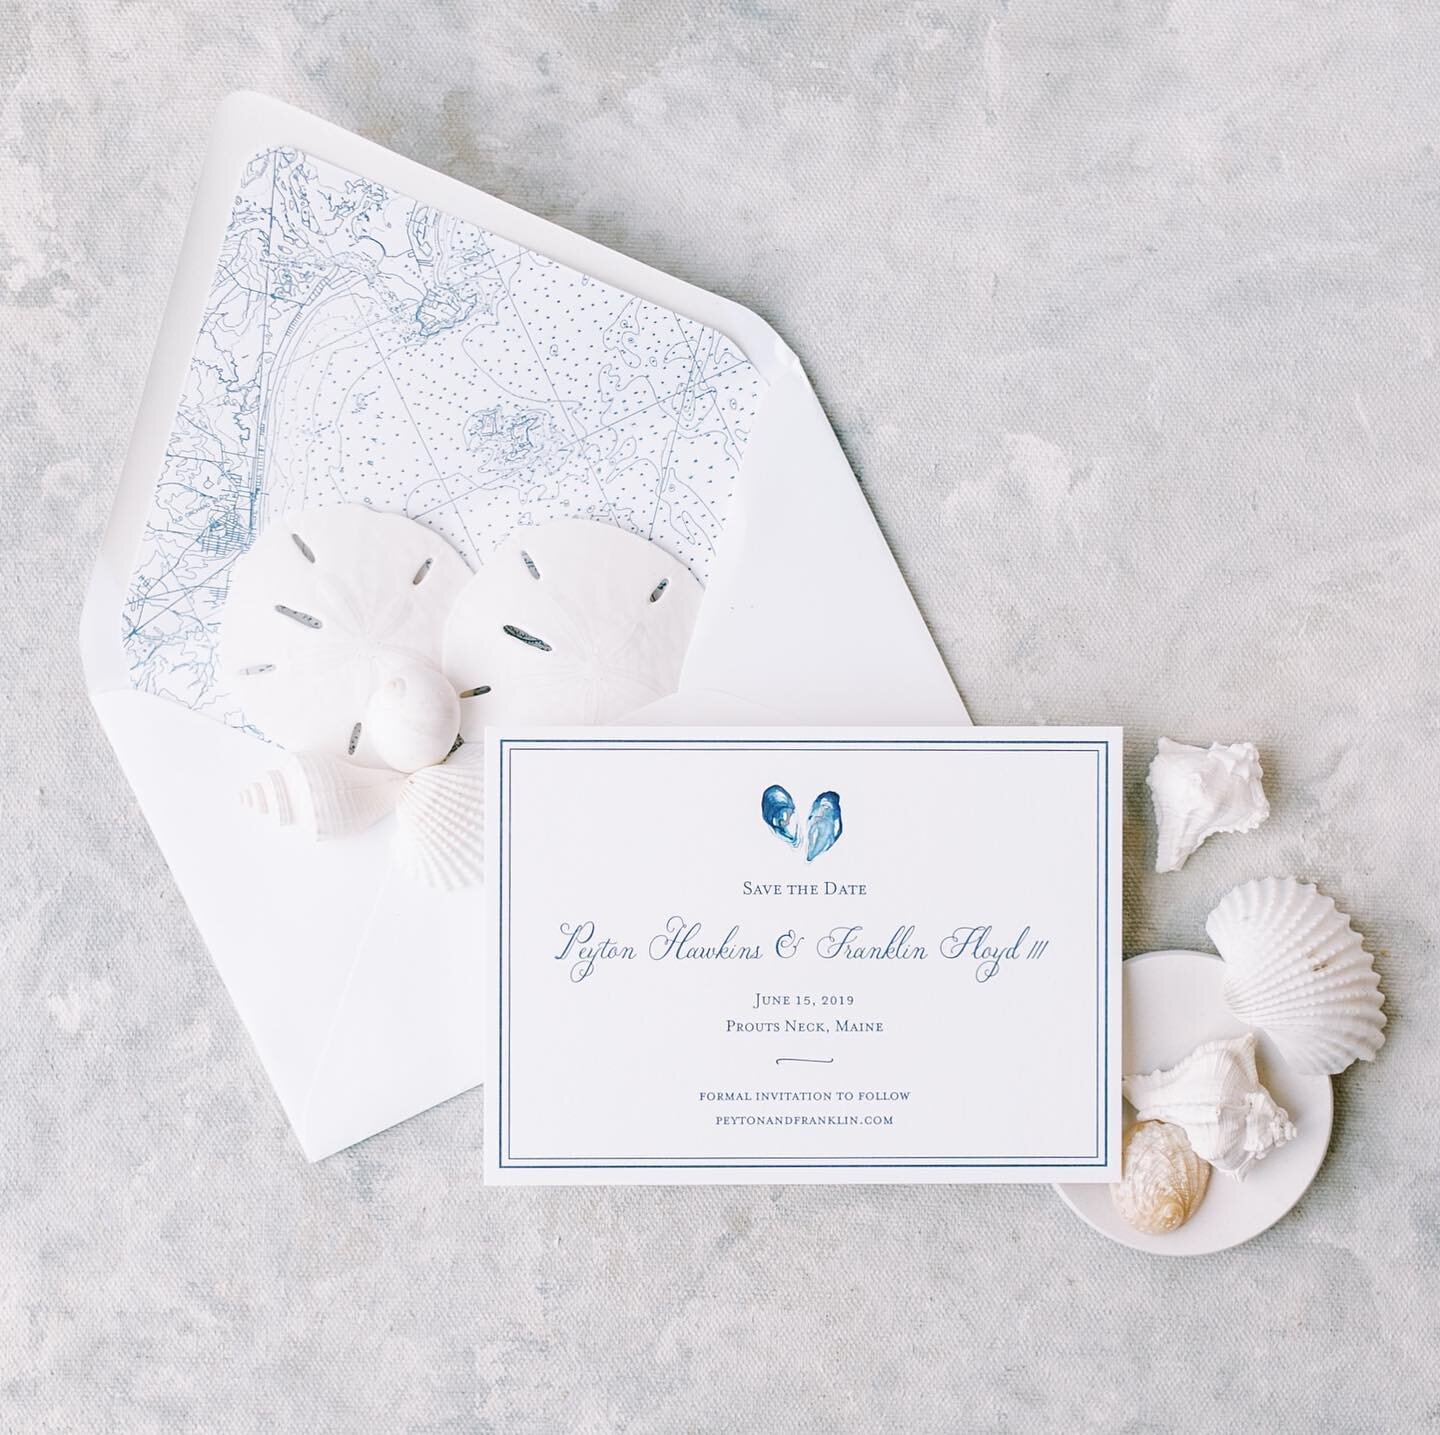 What is a Maine wedding without some mussels? We created these coupled mussels for Peyton &amp; Franklin's letterpress Save the Date. The mussels set the tone for this elevated northeastern wedding weekend. ⁠
⁠
Swipe to see how mussels made their way